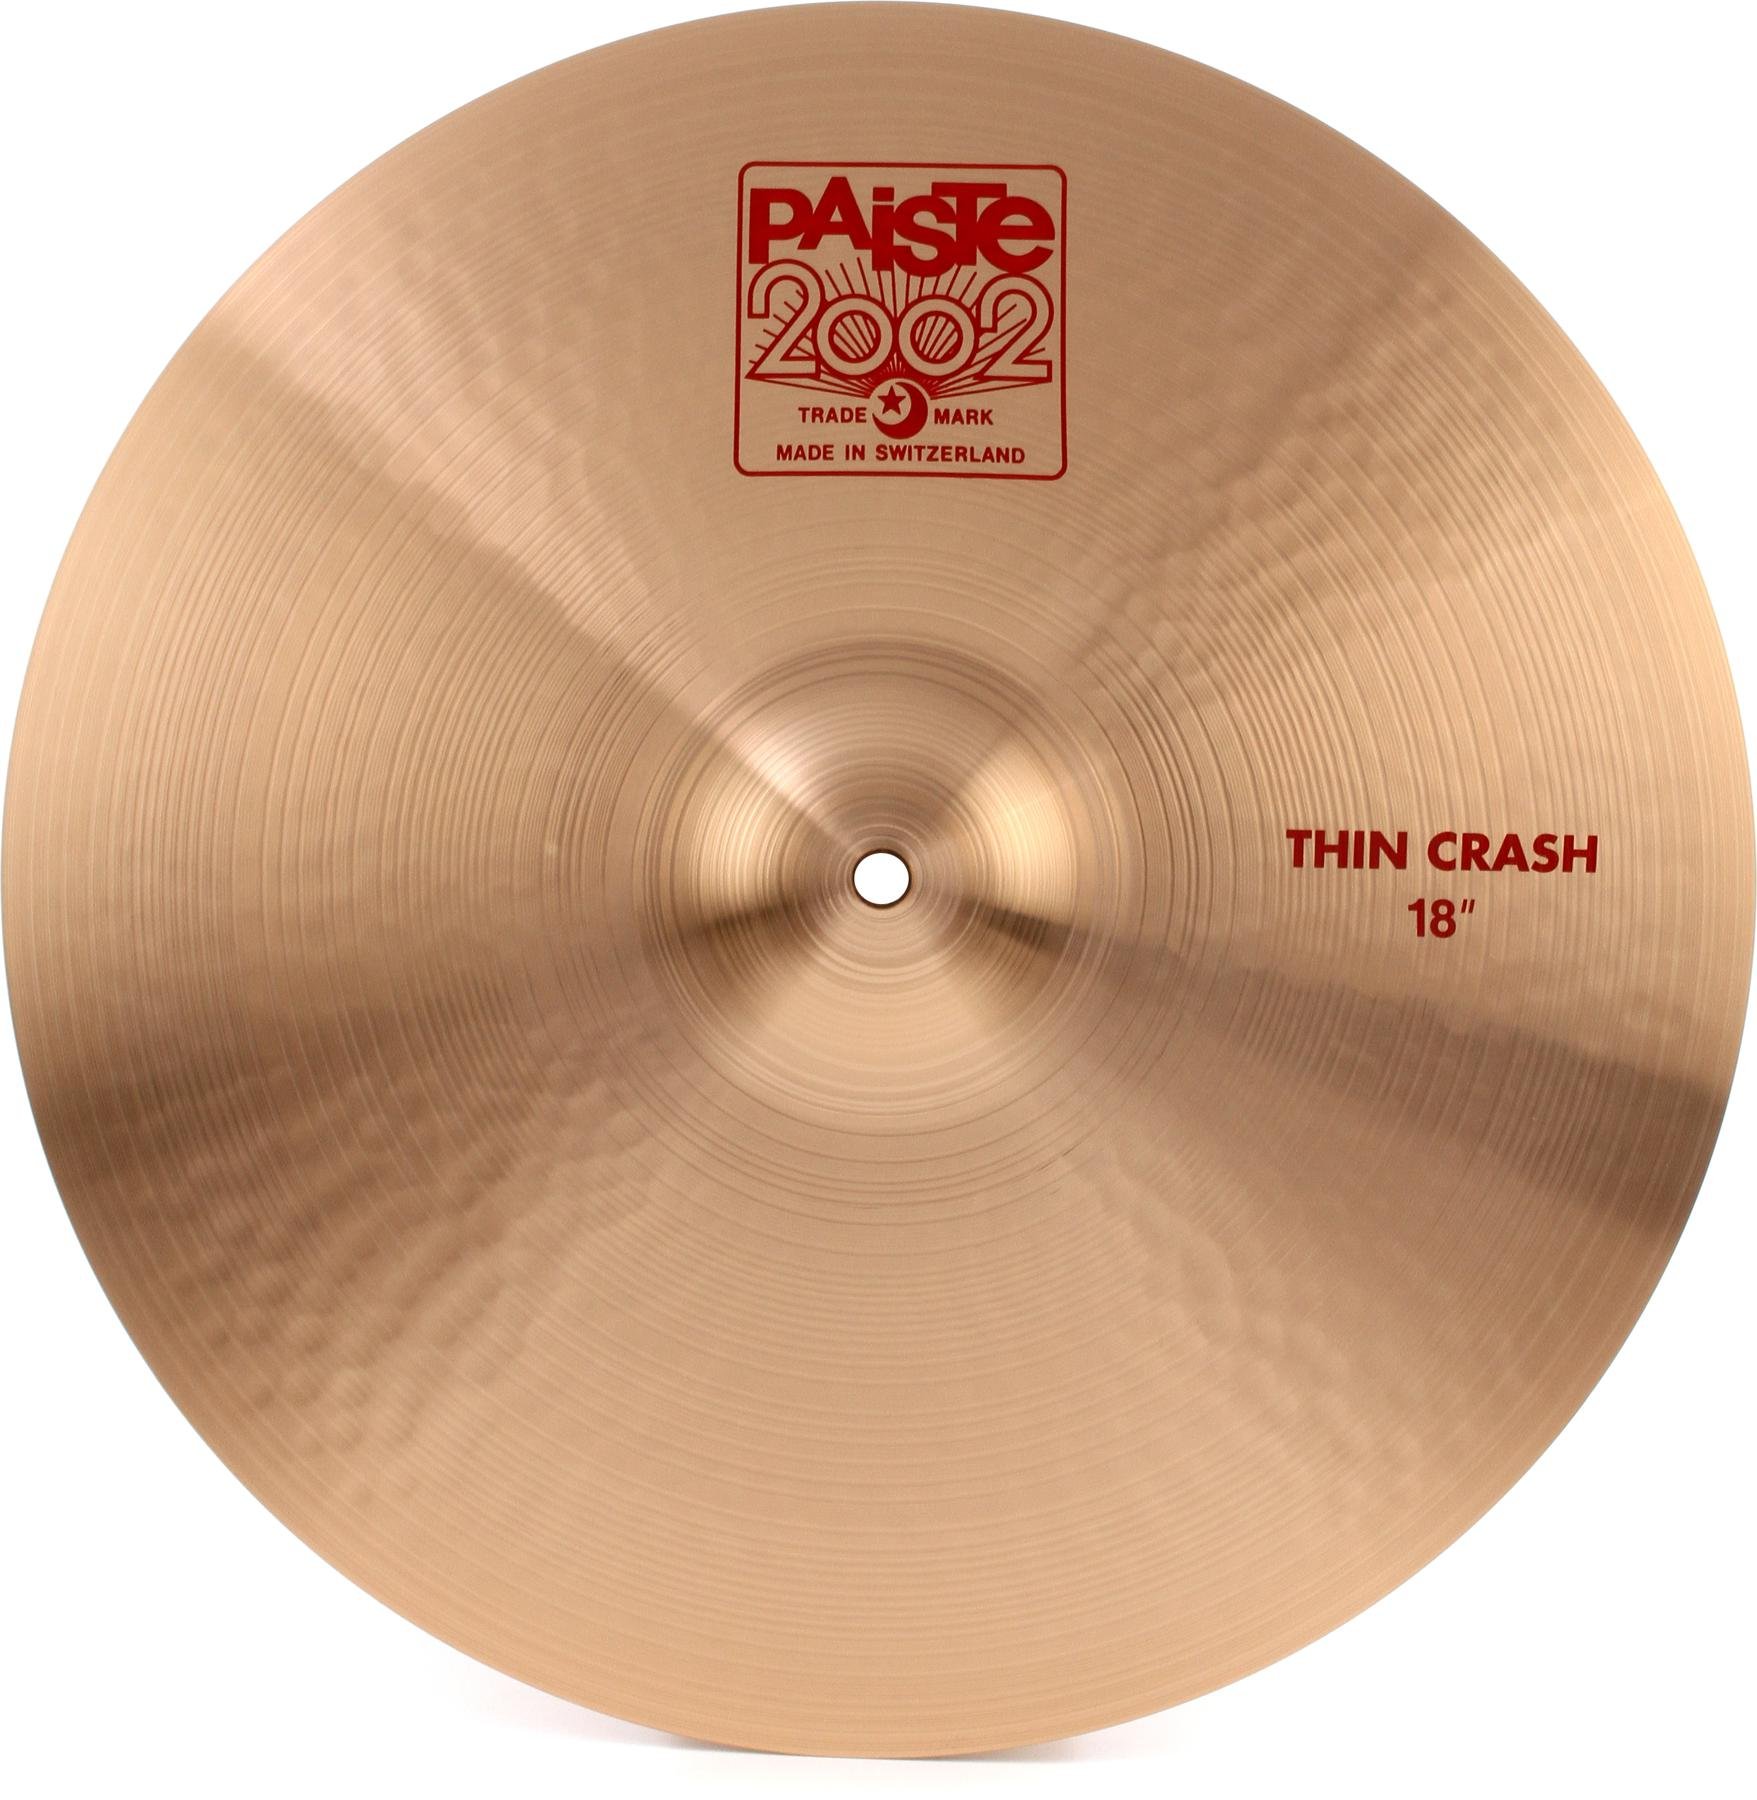 Paiste 18 inch 2002 Thin Crash Cymbal | Sweetwater